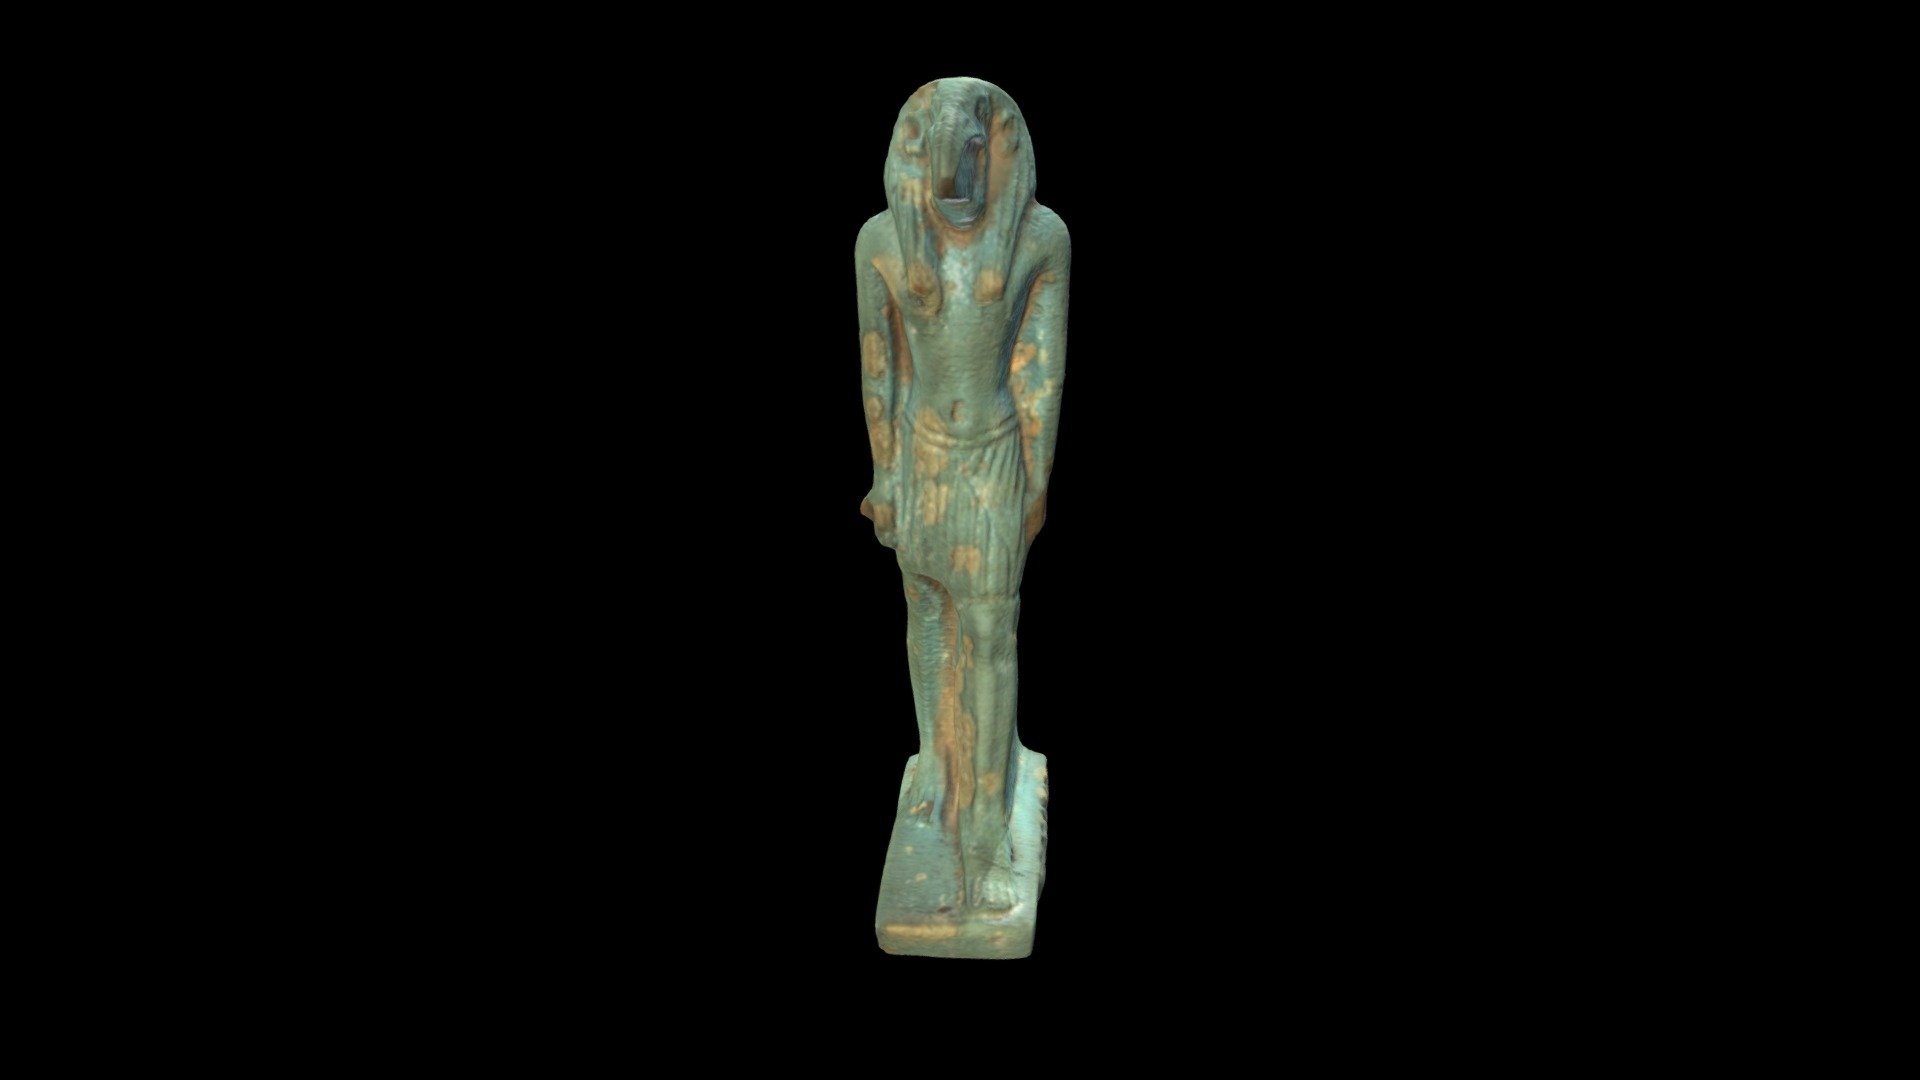 Egypt

Ceramic (Baked)- Faience

SM1902.17.17

Scanned by Andréa Martinez with the Artec Spider 3D Scanner - Thoth Figurine - 3D model by Harvard Museum of the Ancient Near East (@hmane) 3d model